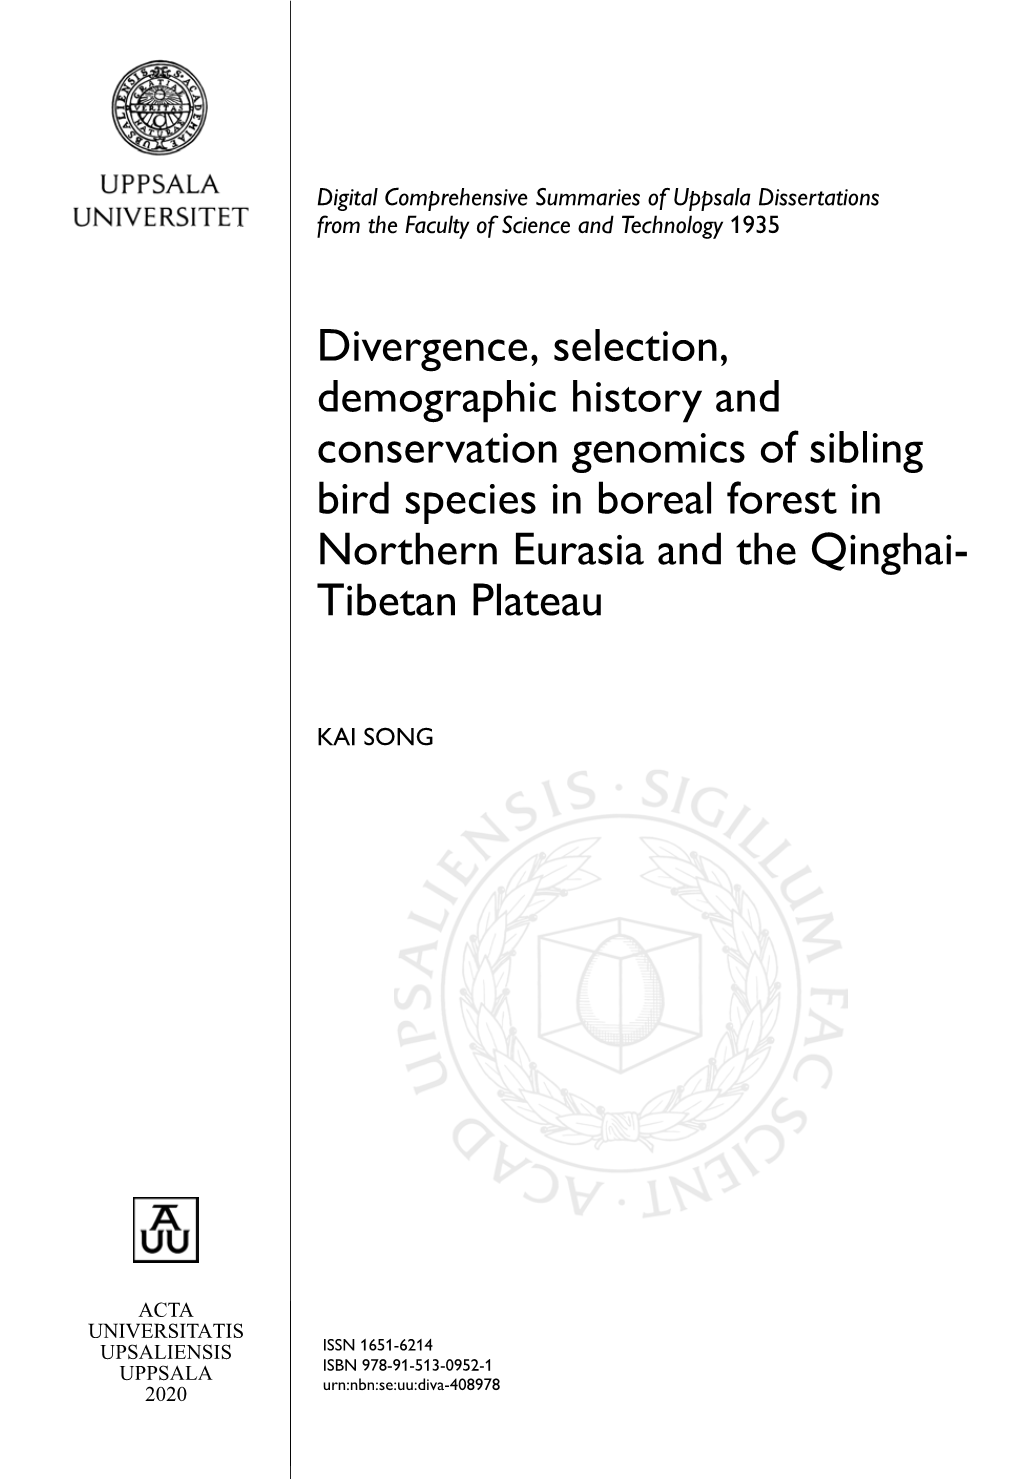 Divergence, Selection, Demographic History and Conservation Genomics of Sibling Bird Species in Boreal Forest in Northern Eurasia and the Qinghai- Tibetan Plateau